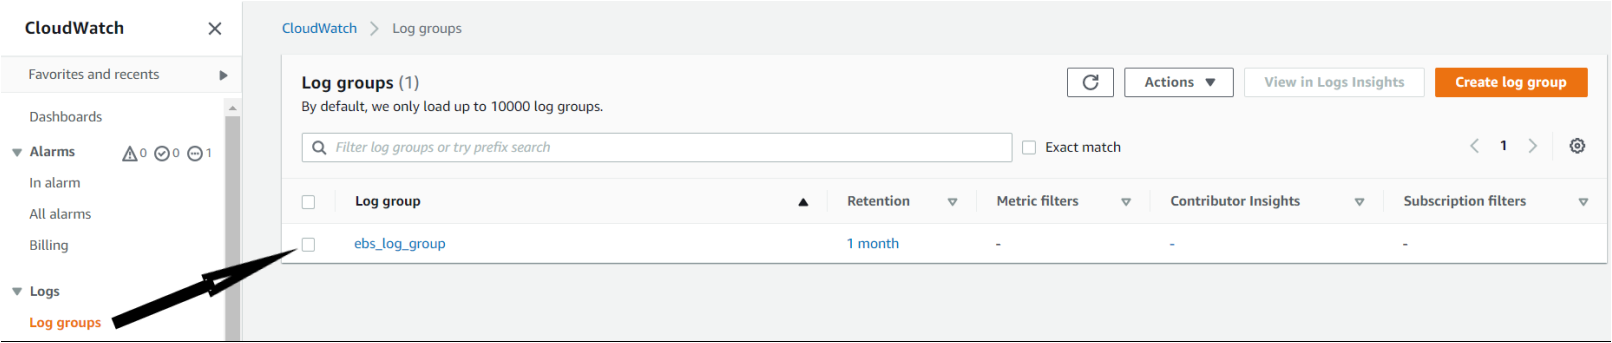 Verifying the CloudWatch log group in the AWS console